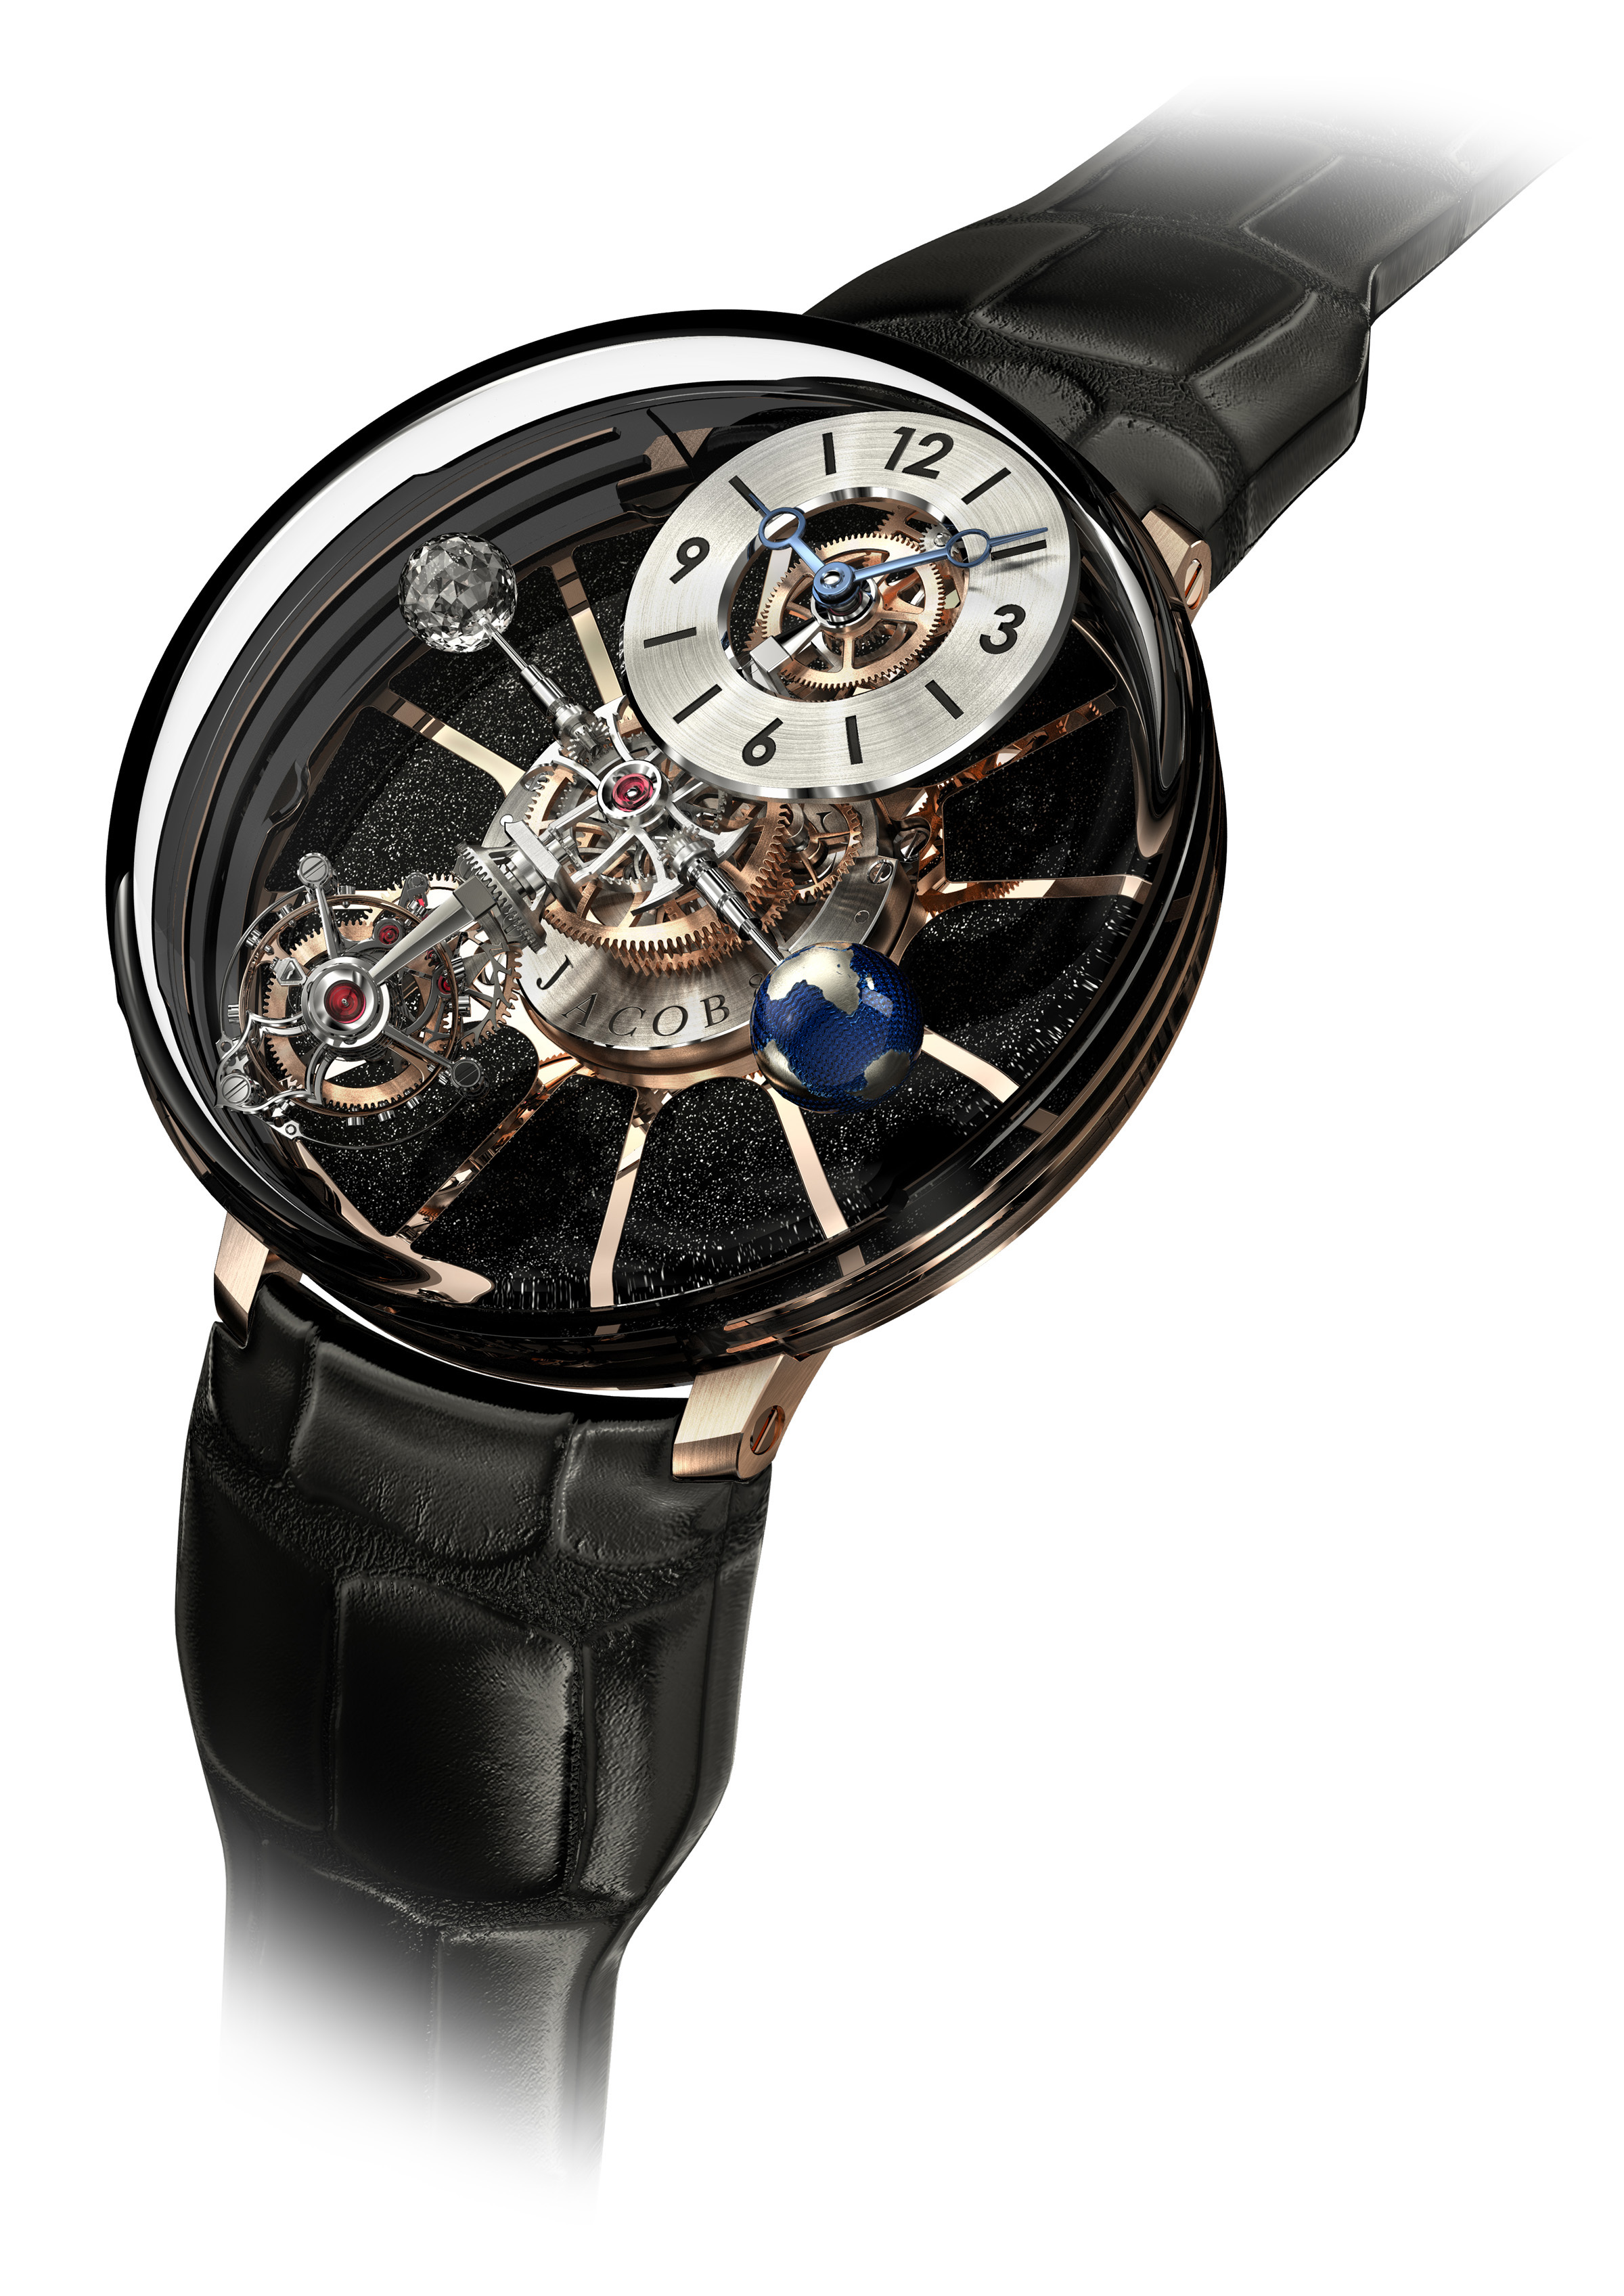 Jacob & Co Astronomia Tourbillon is a complex system of axes and indications. 